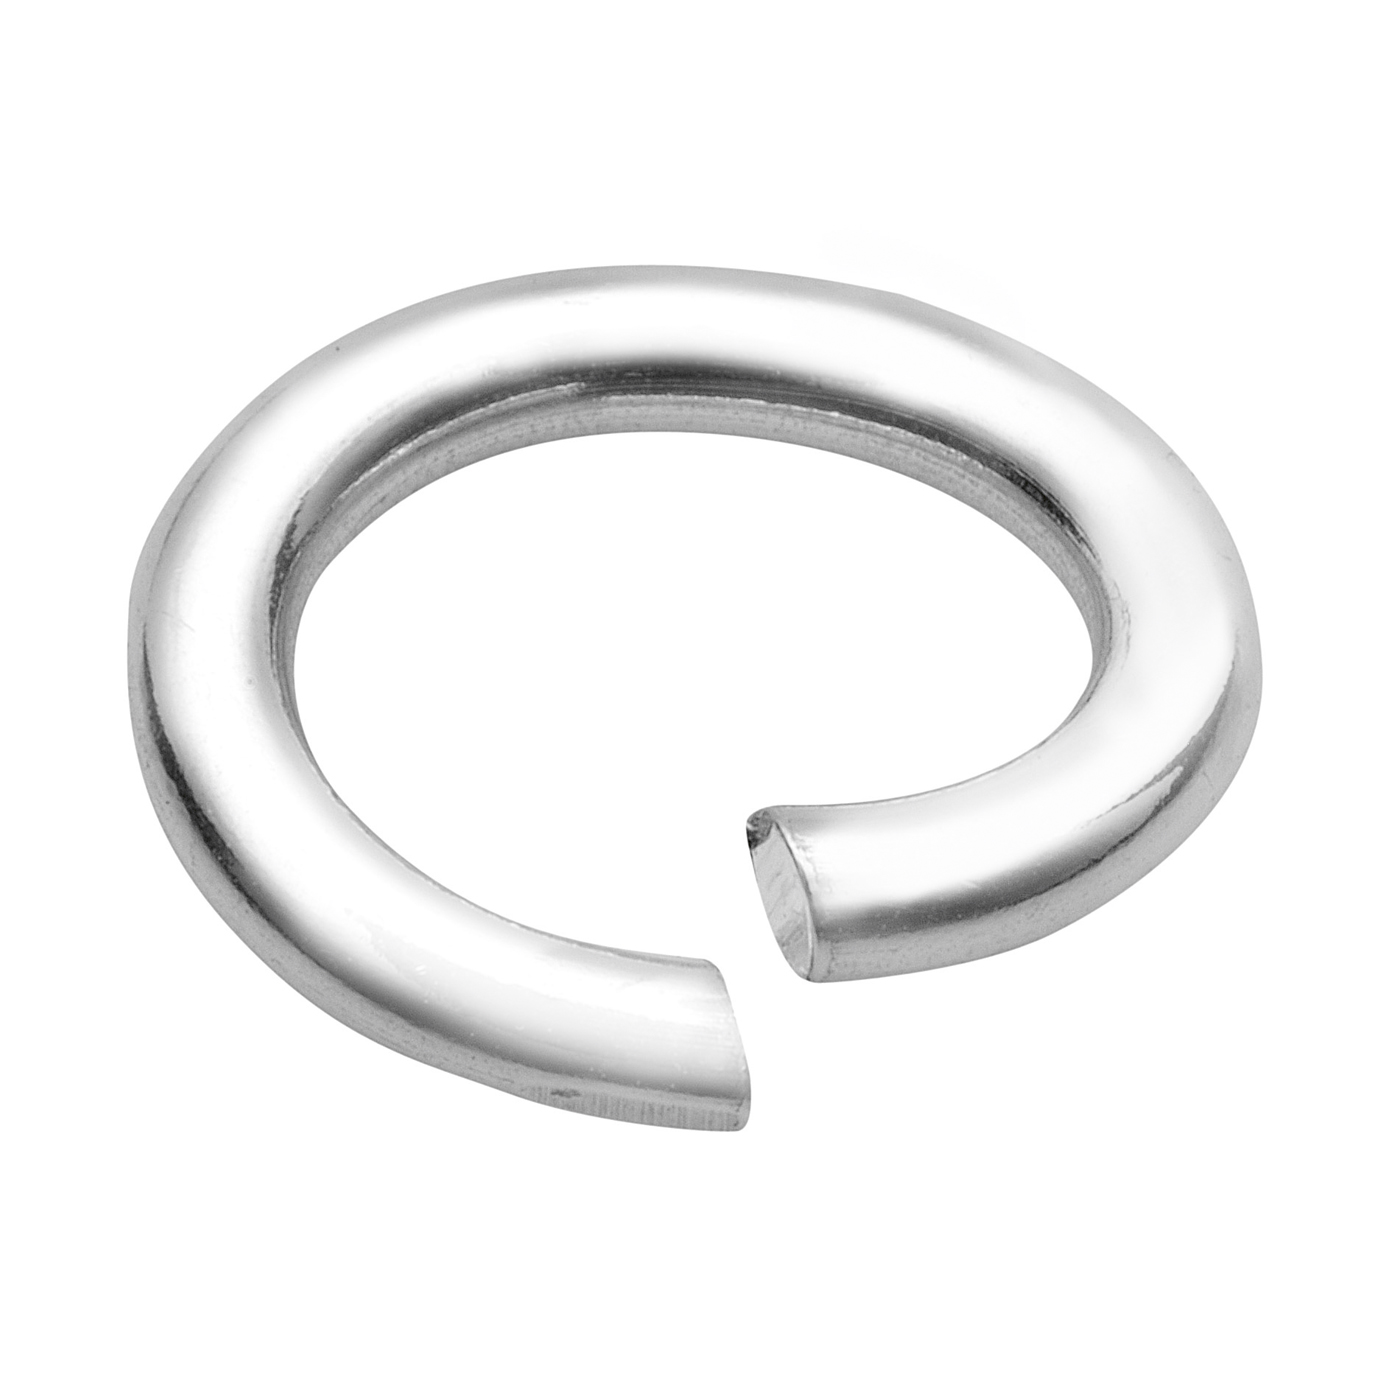 Binding Rings, oval, 925Ag, ø 9 mm - 10 pieces